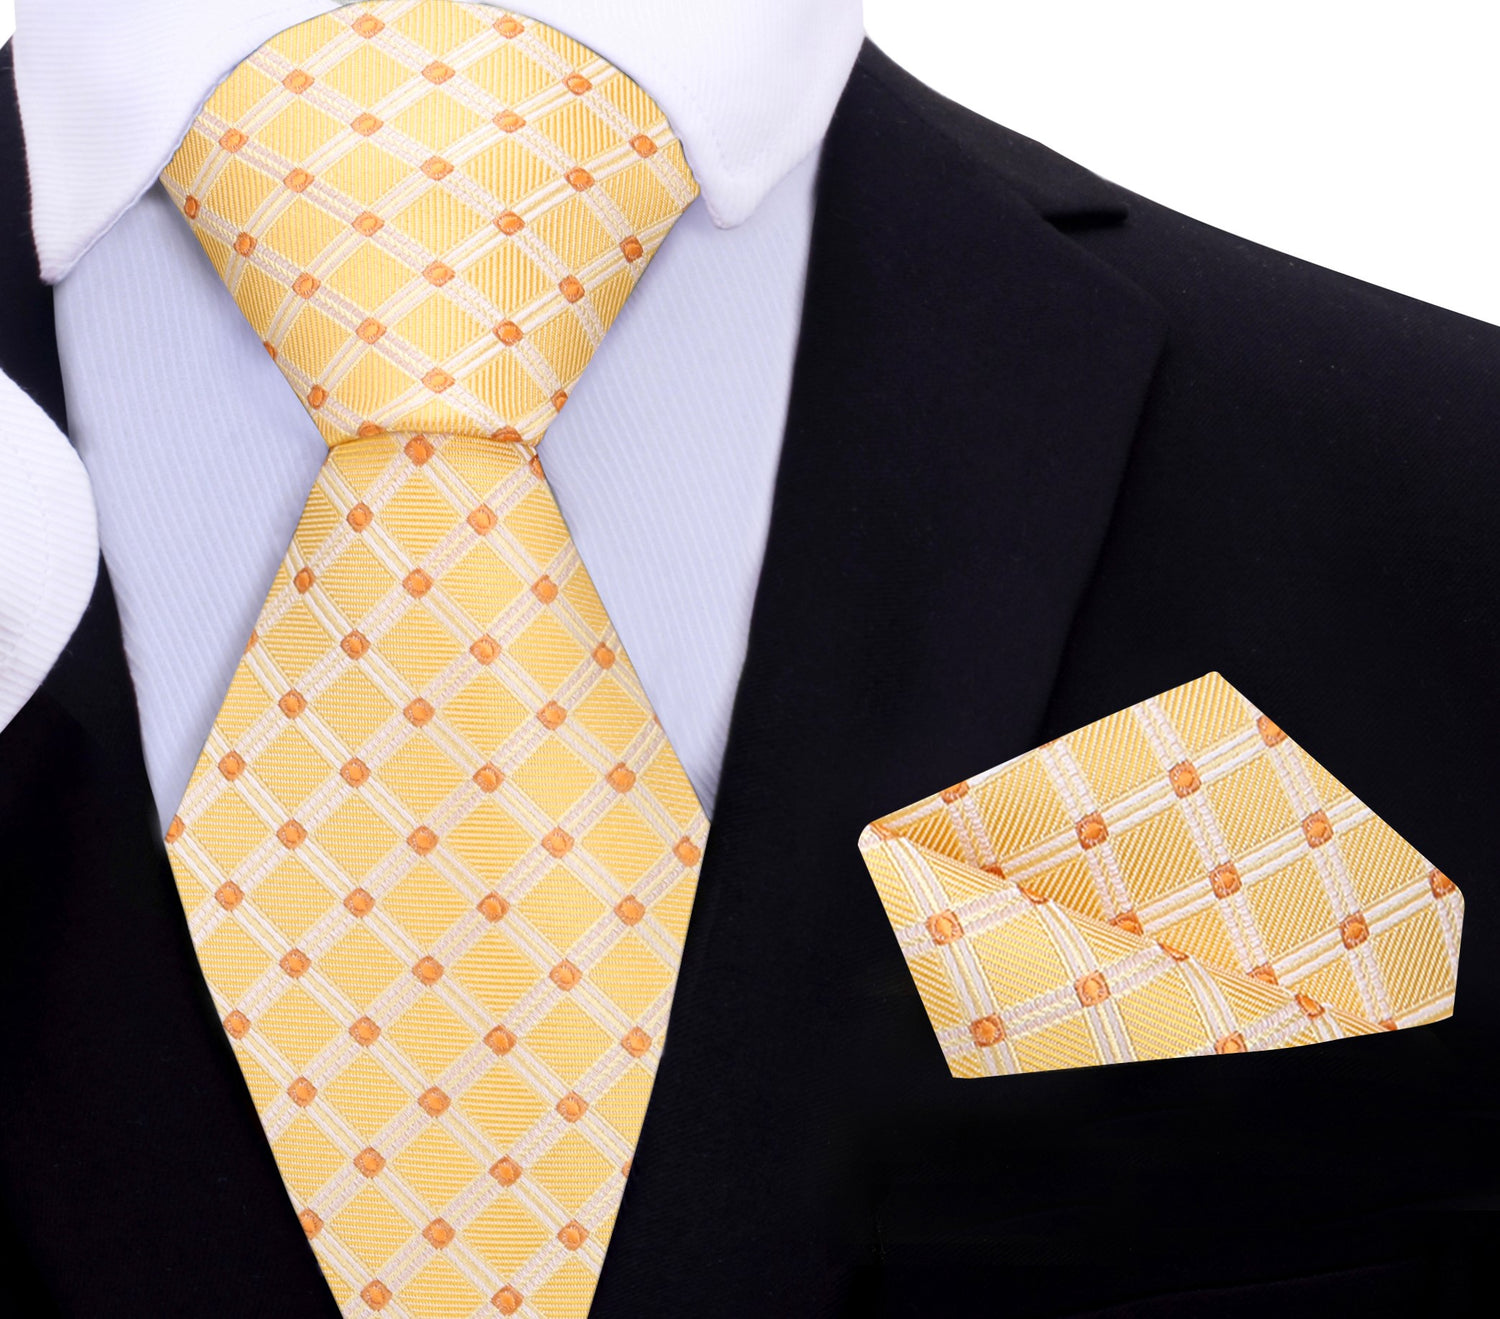 A Yellow Gold, Amber Geometric Diamond With Small Check Pattern Silk Necktie, Matching Pocket Square